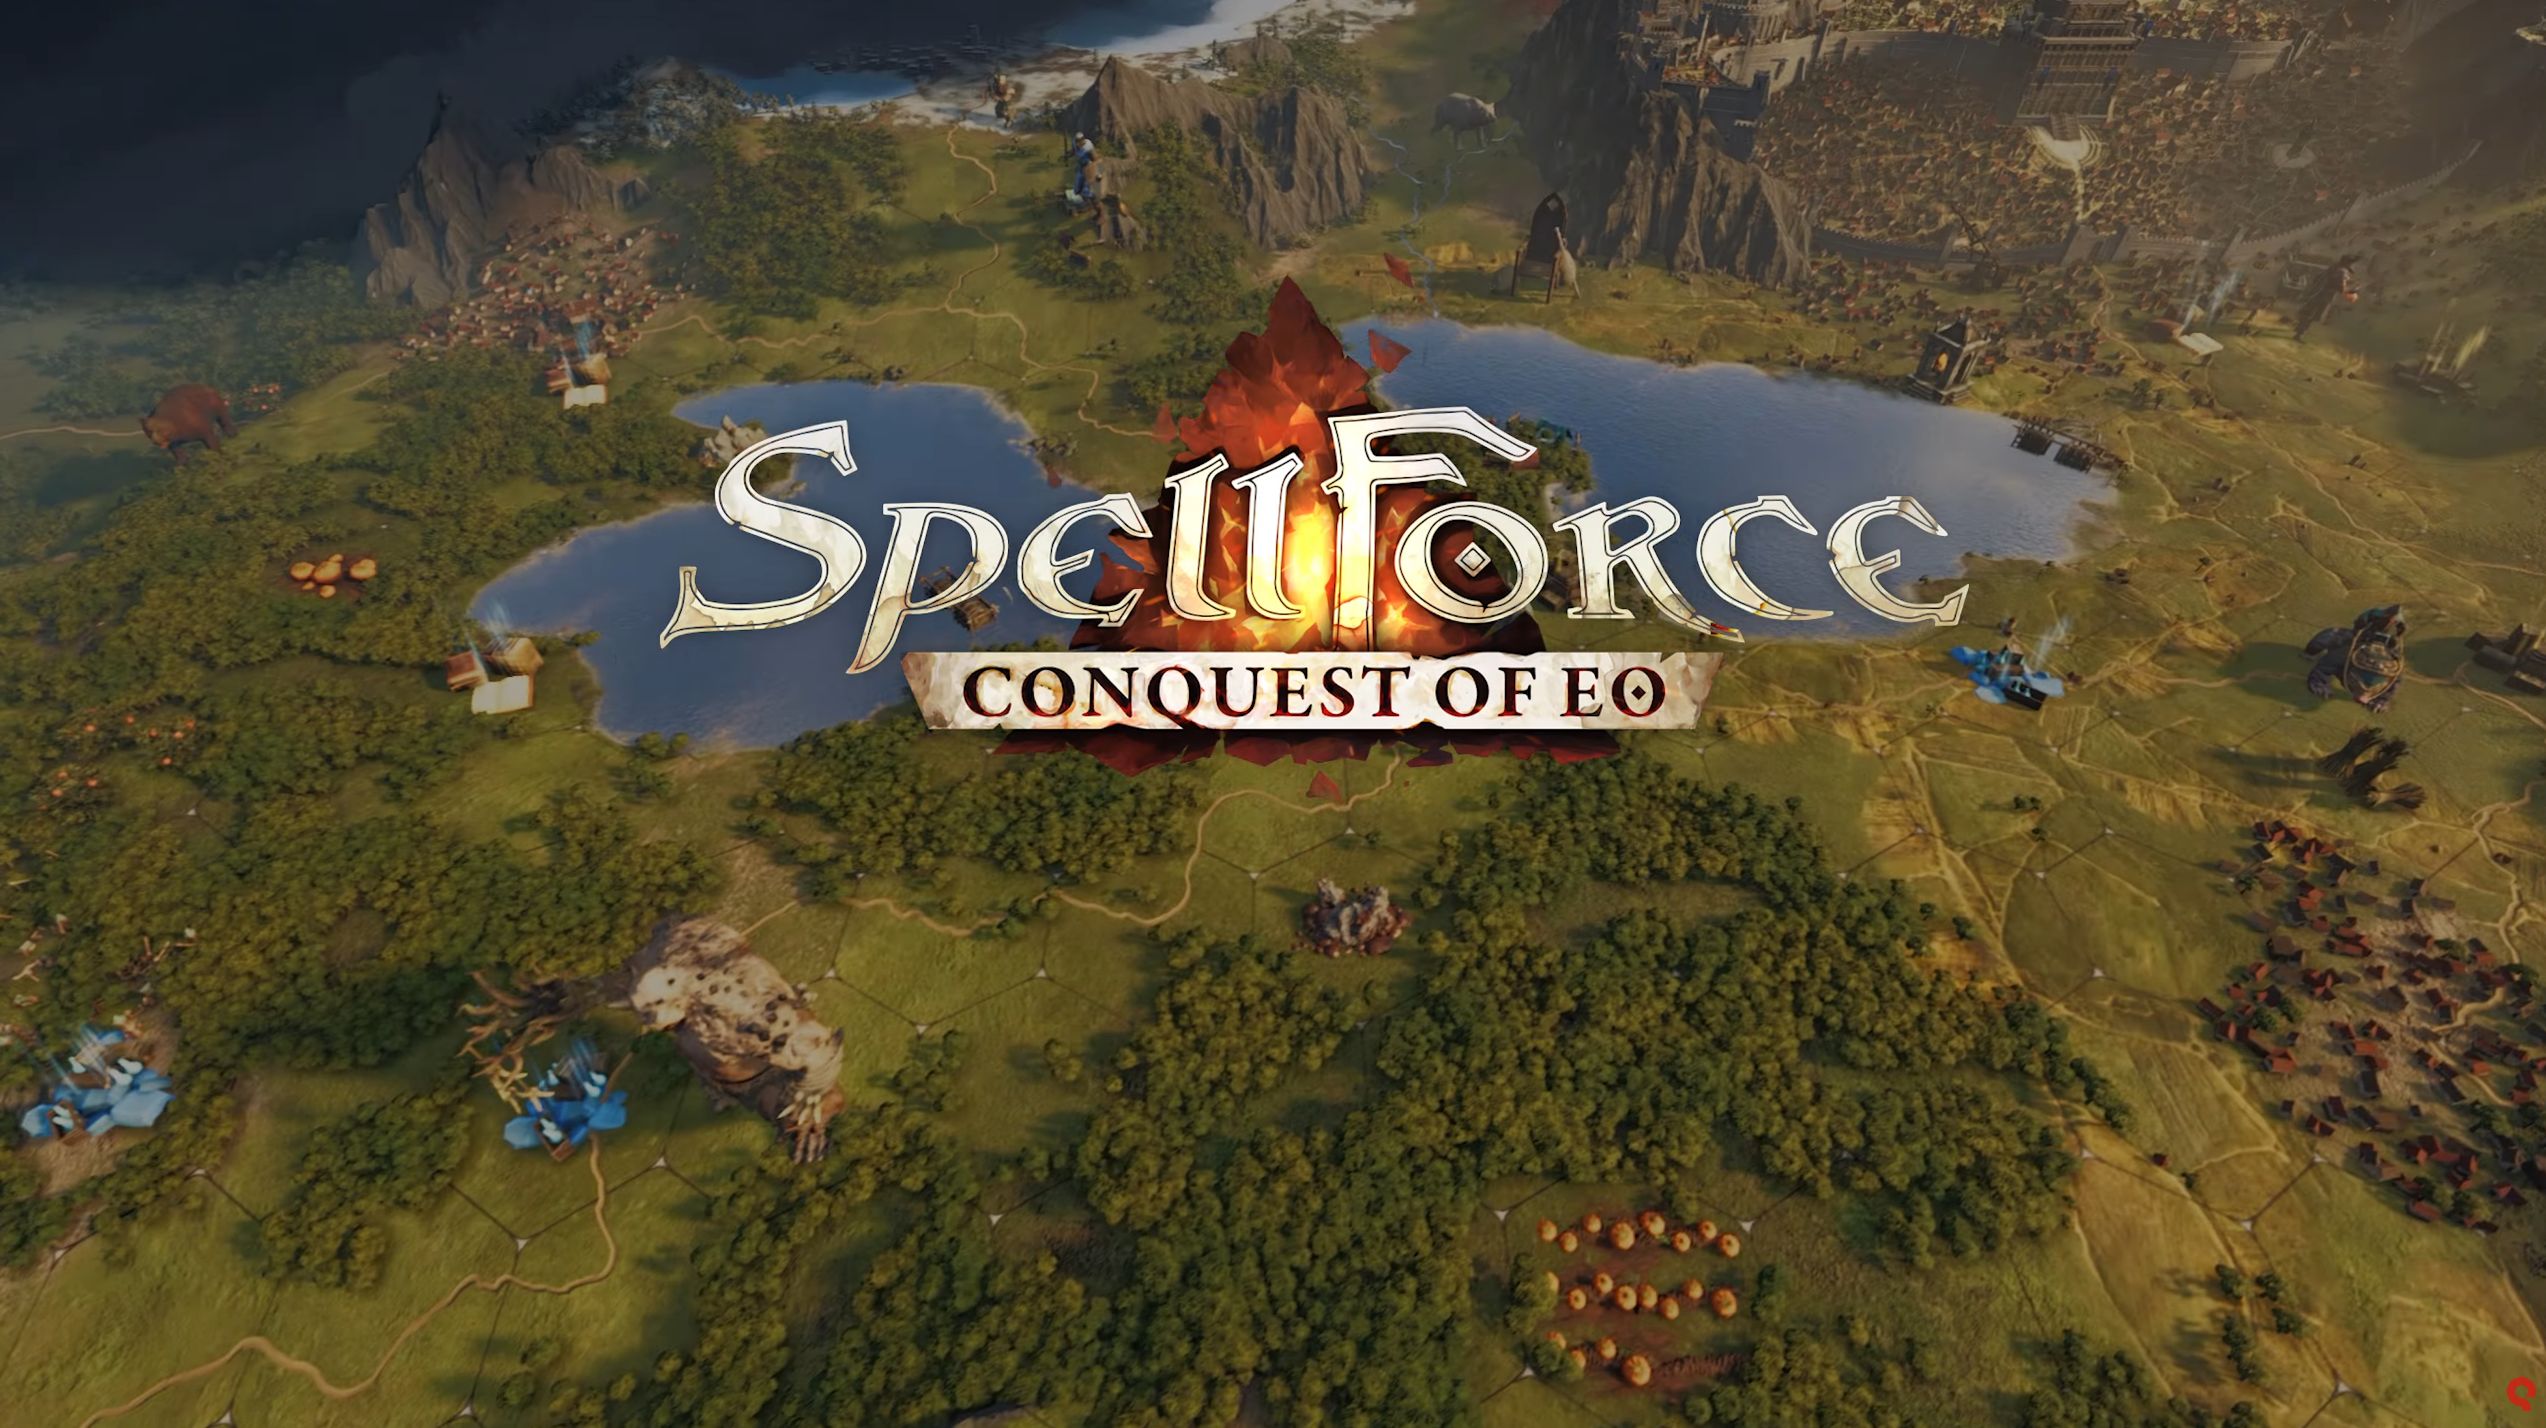 SpellForce - Conquest of Eo: announcement trailer of the new strategy RPG